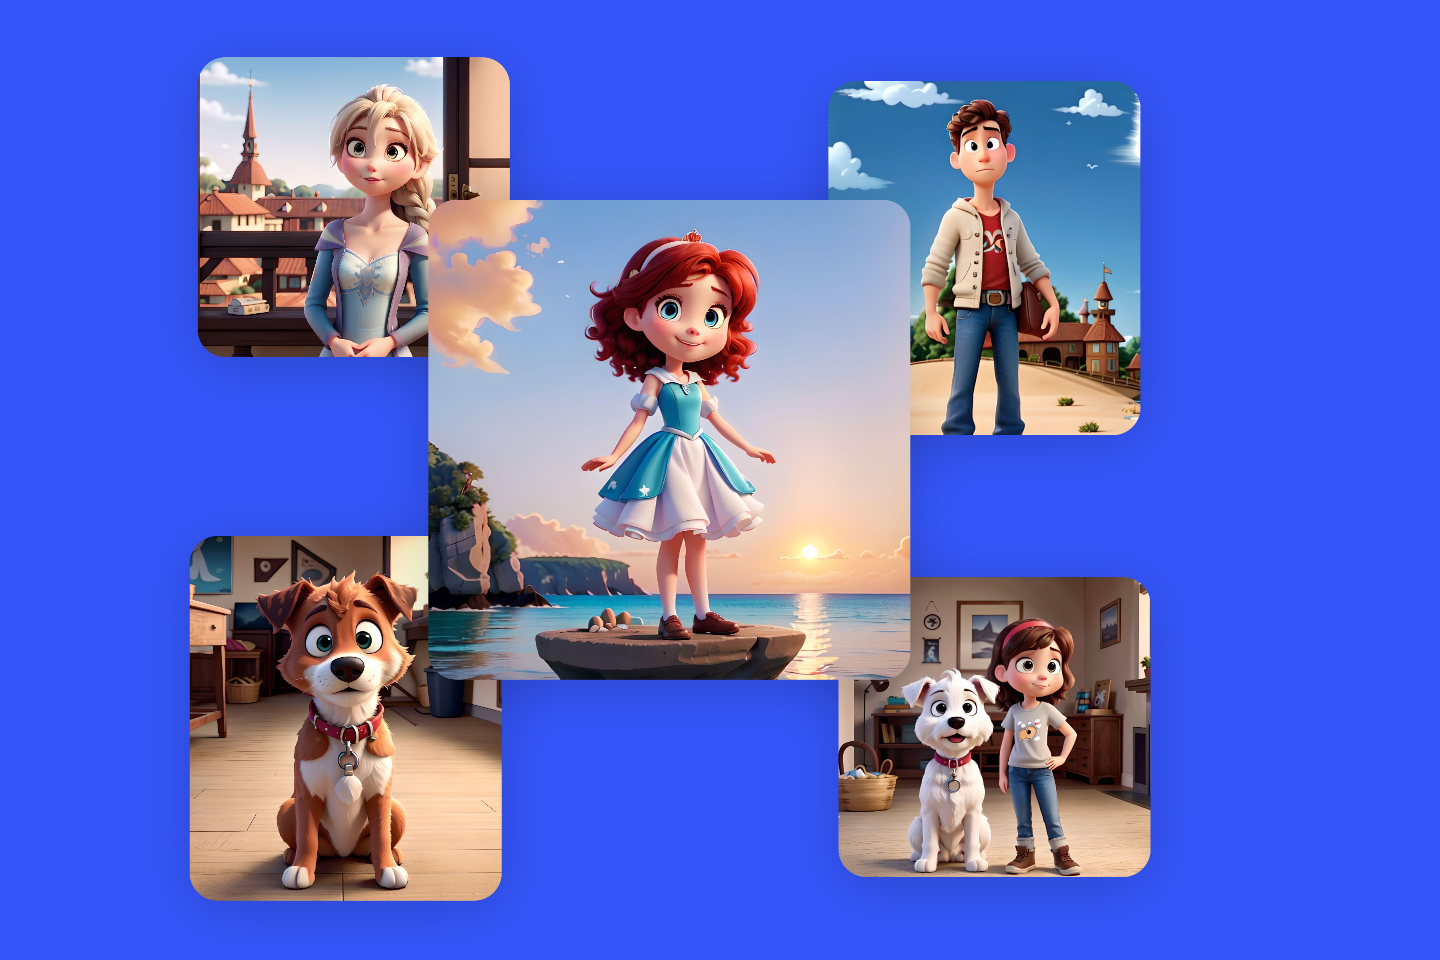 Turn your dog into a Disney Pixar character